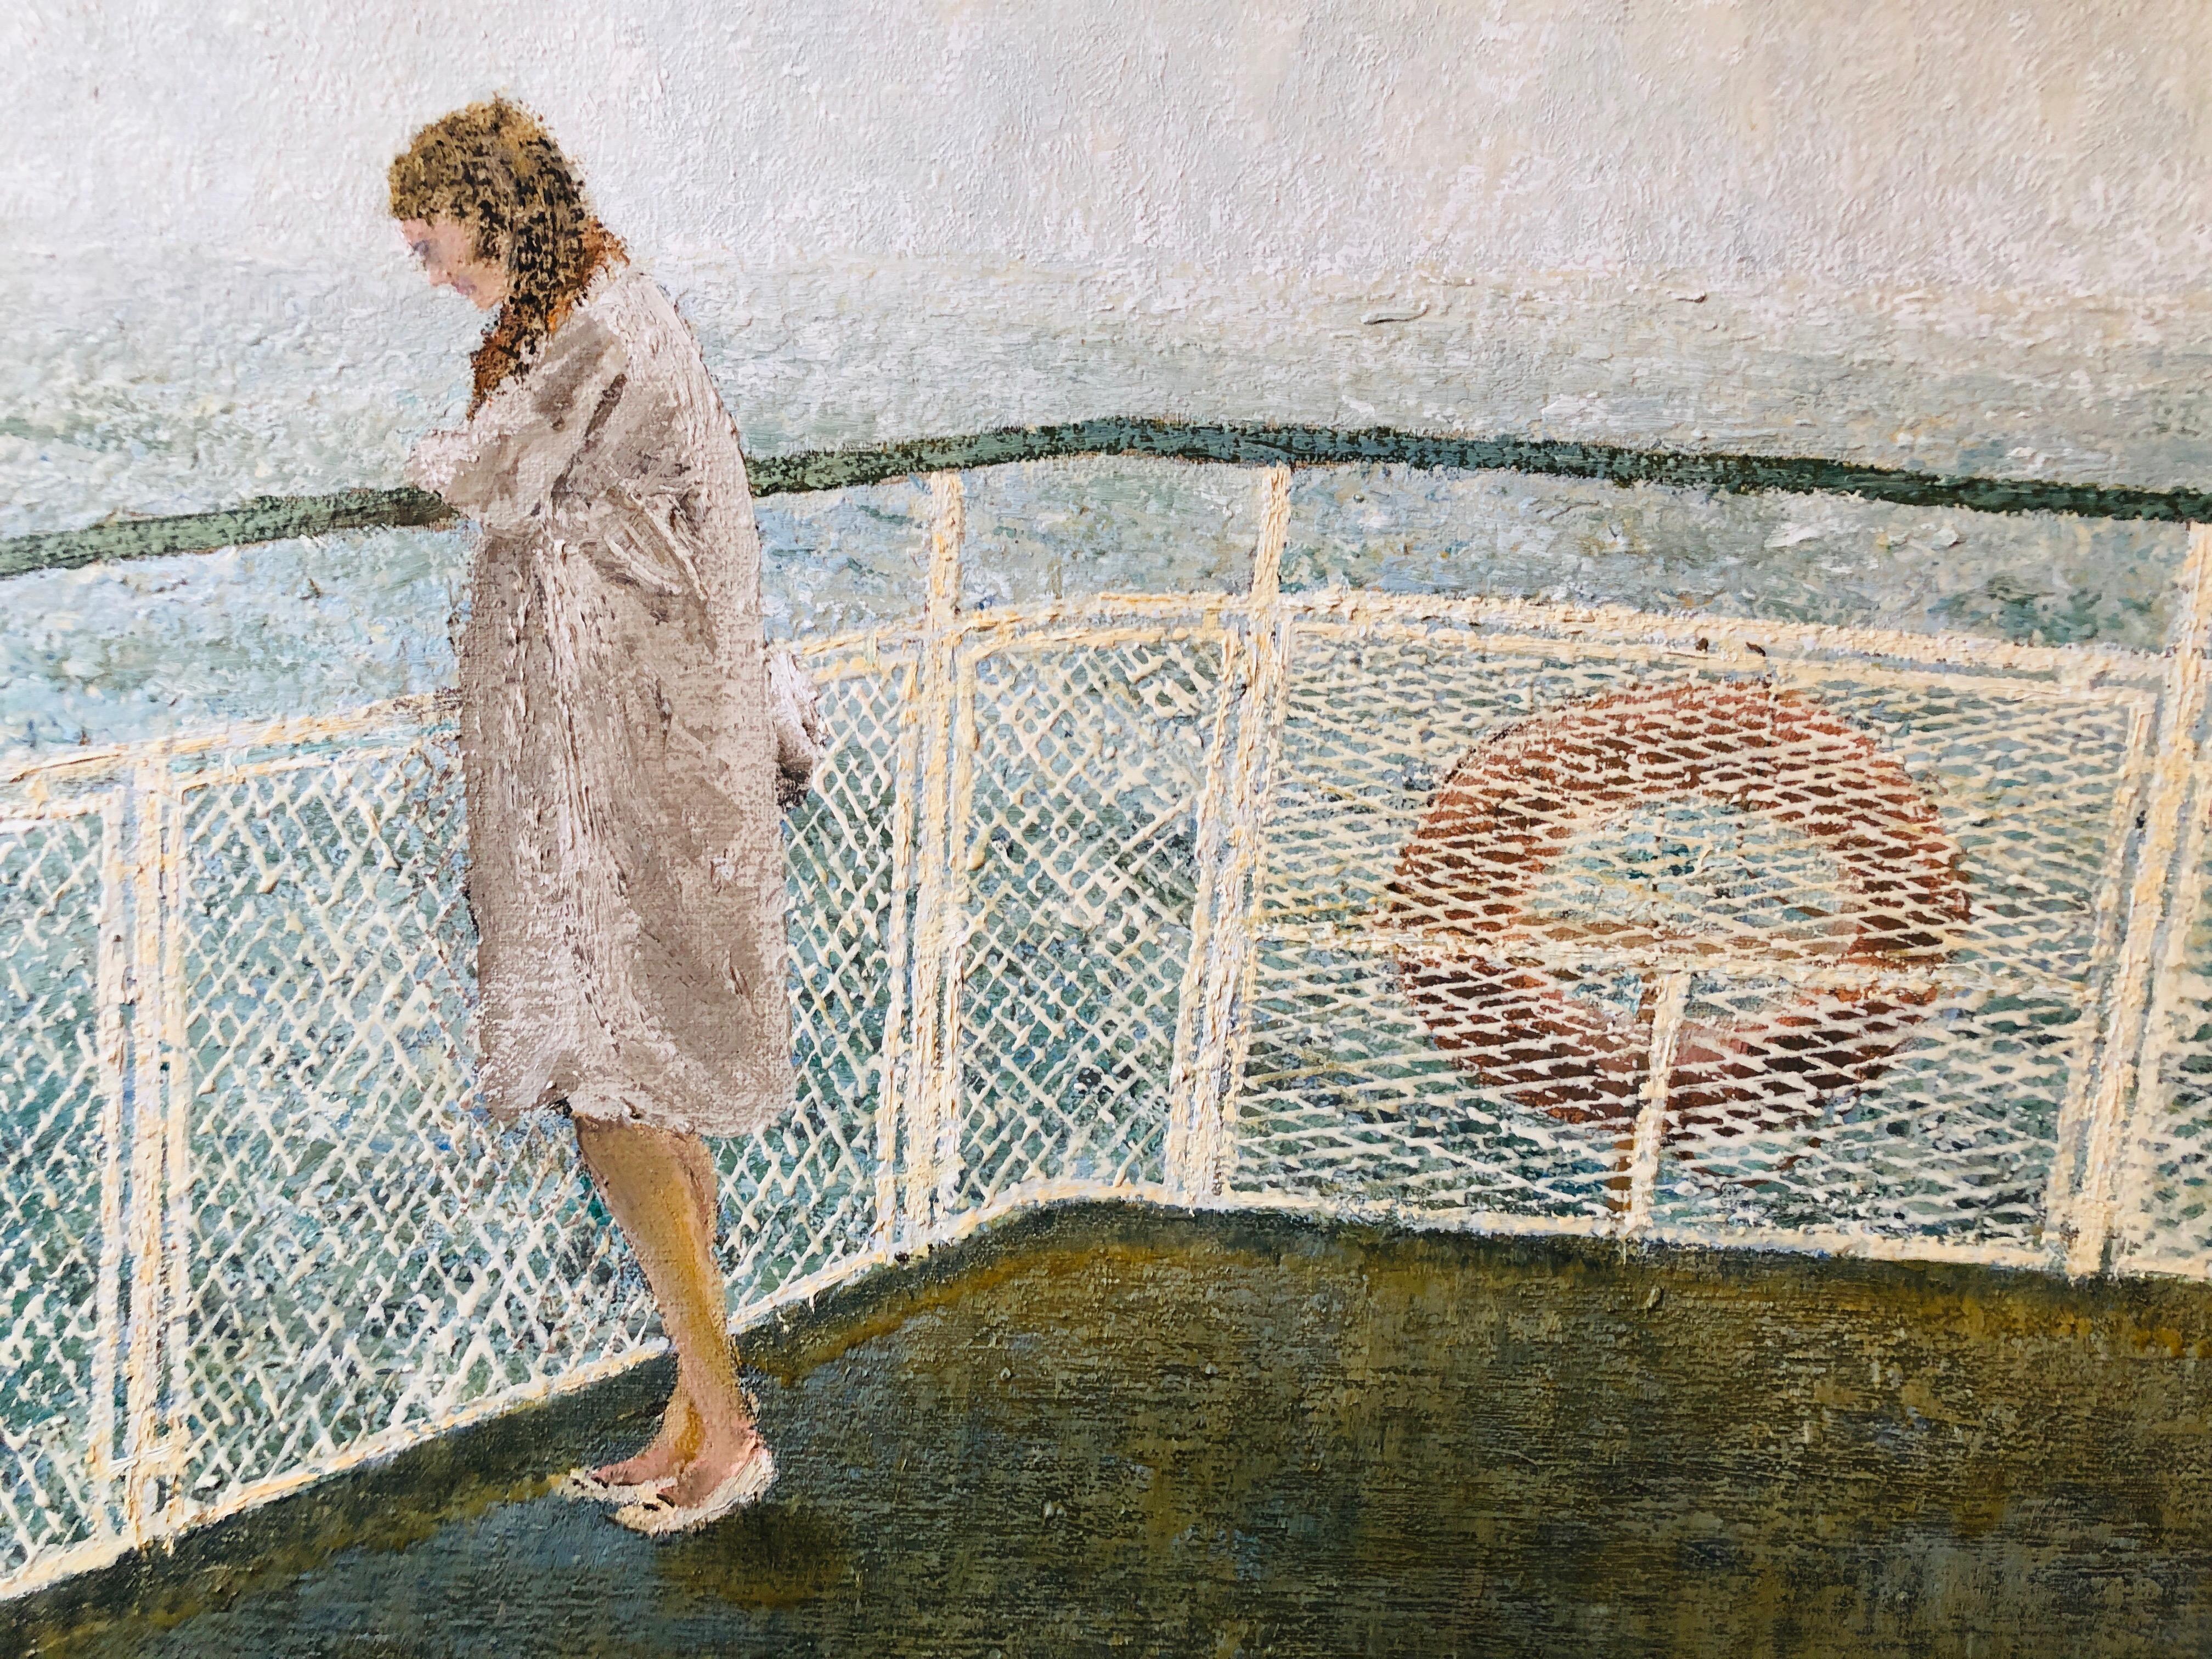 This is a lovely painting of a female ferry passenger peering over the railing into the water by Northwest artist A. Jones.